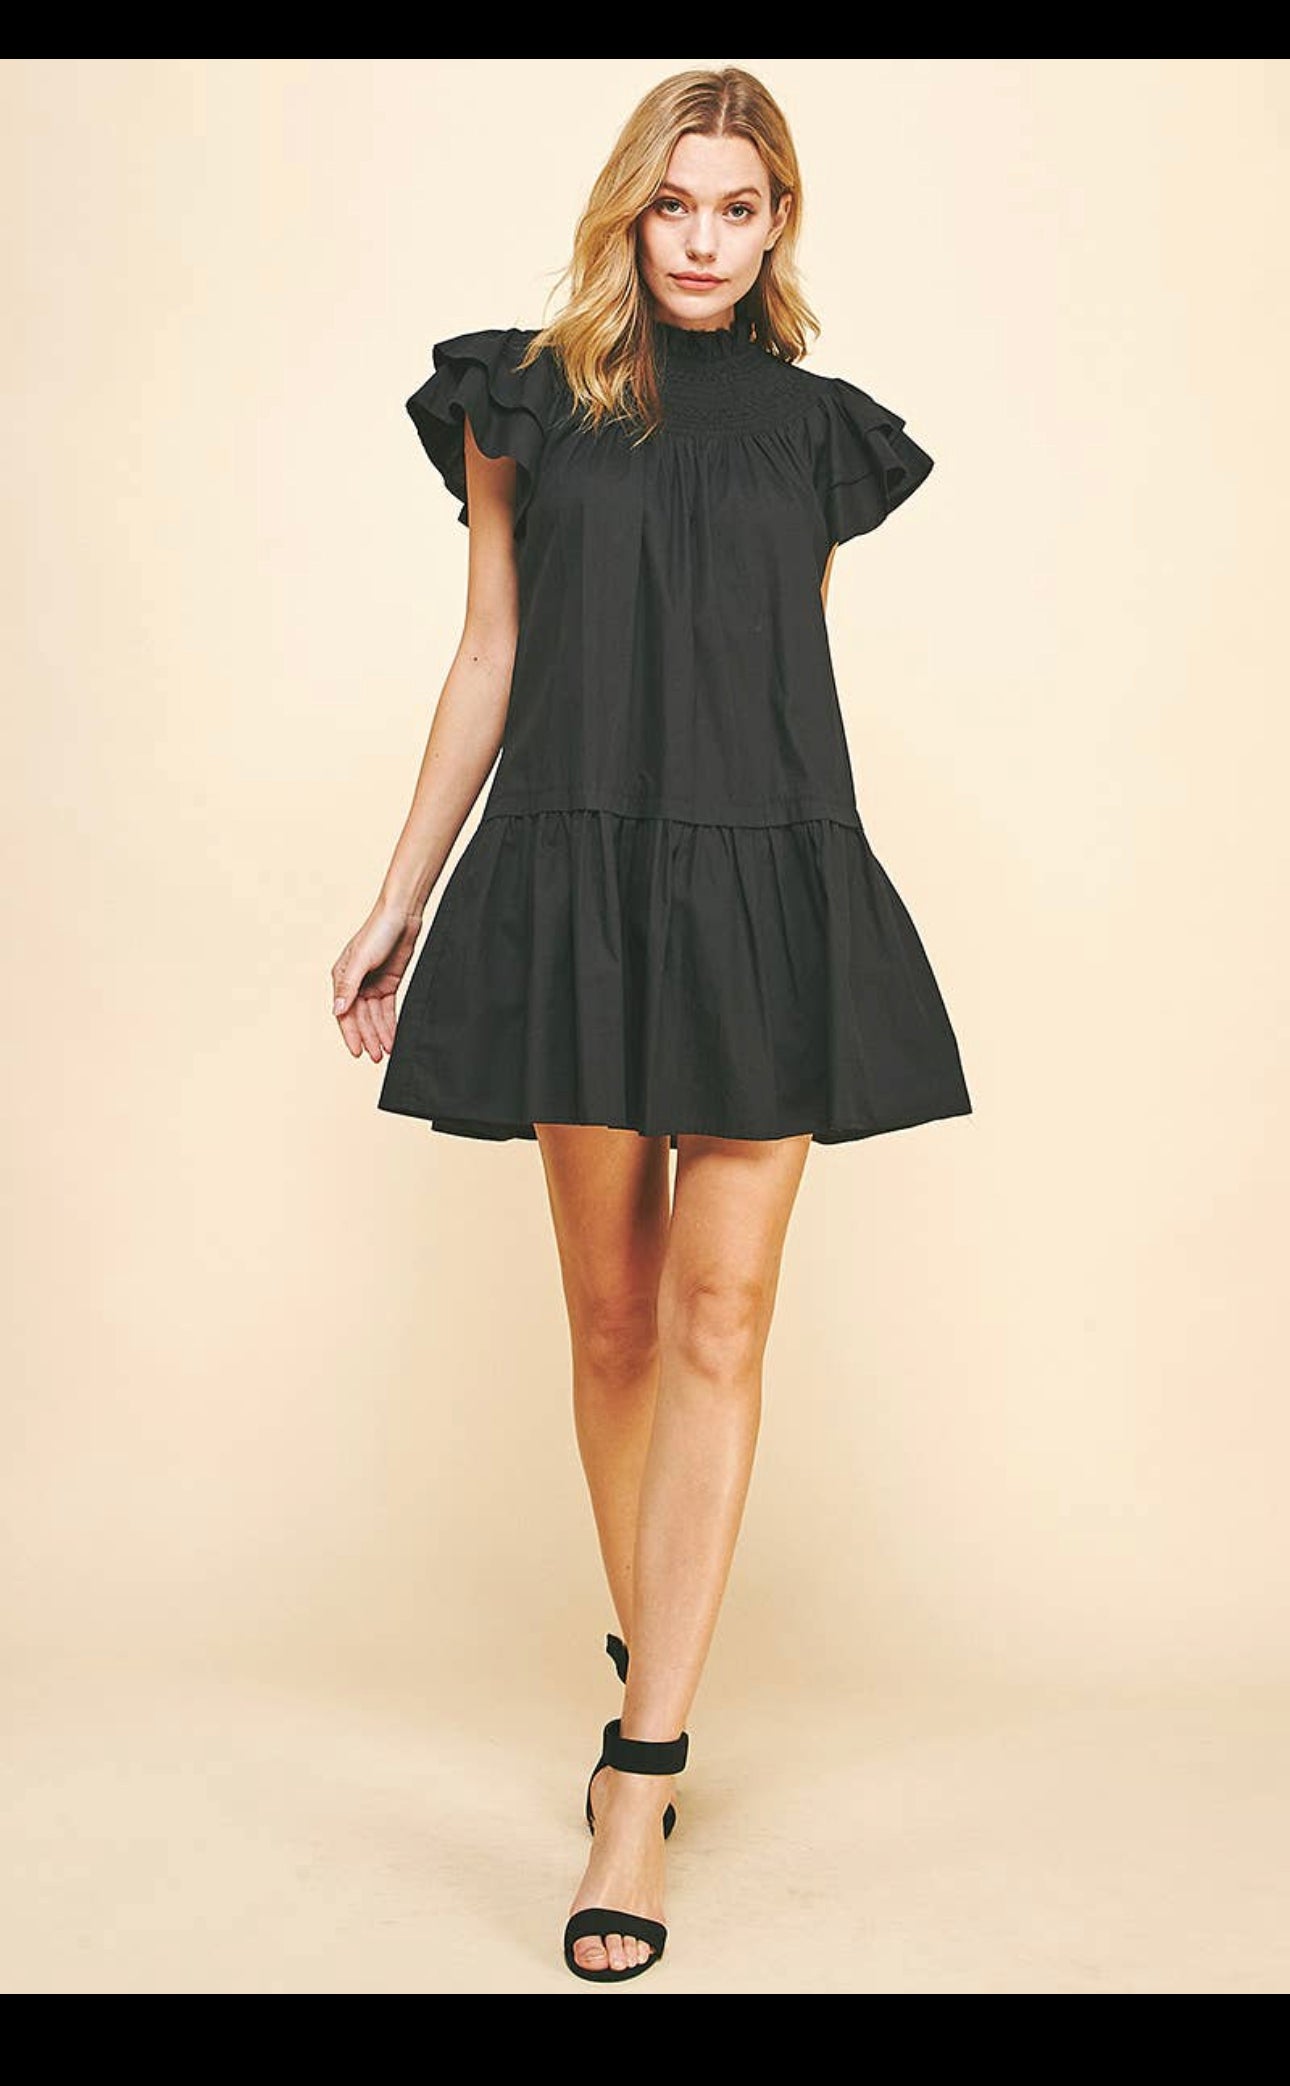 The •Chase• Dress in black